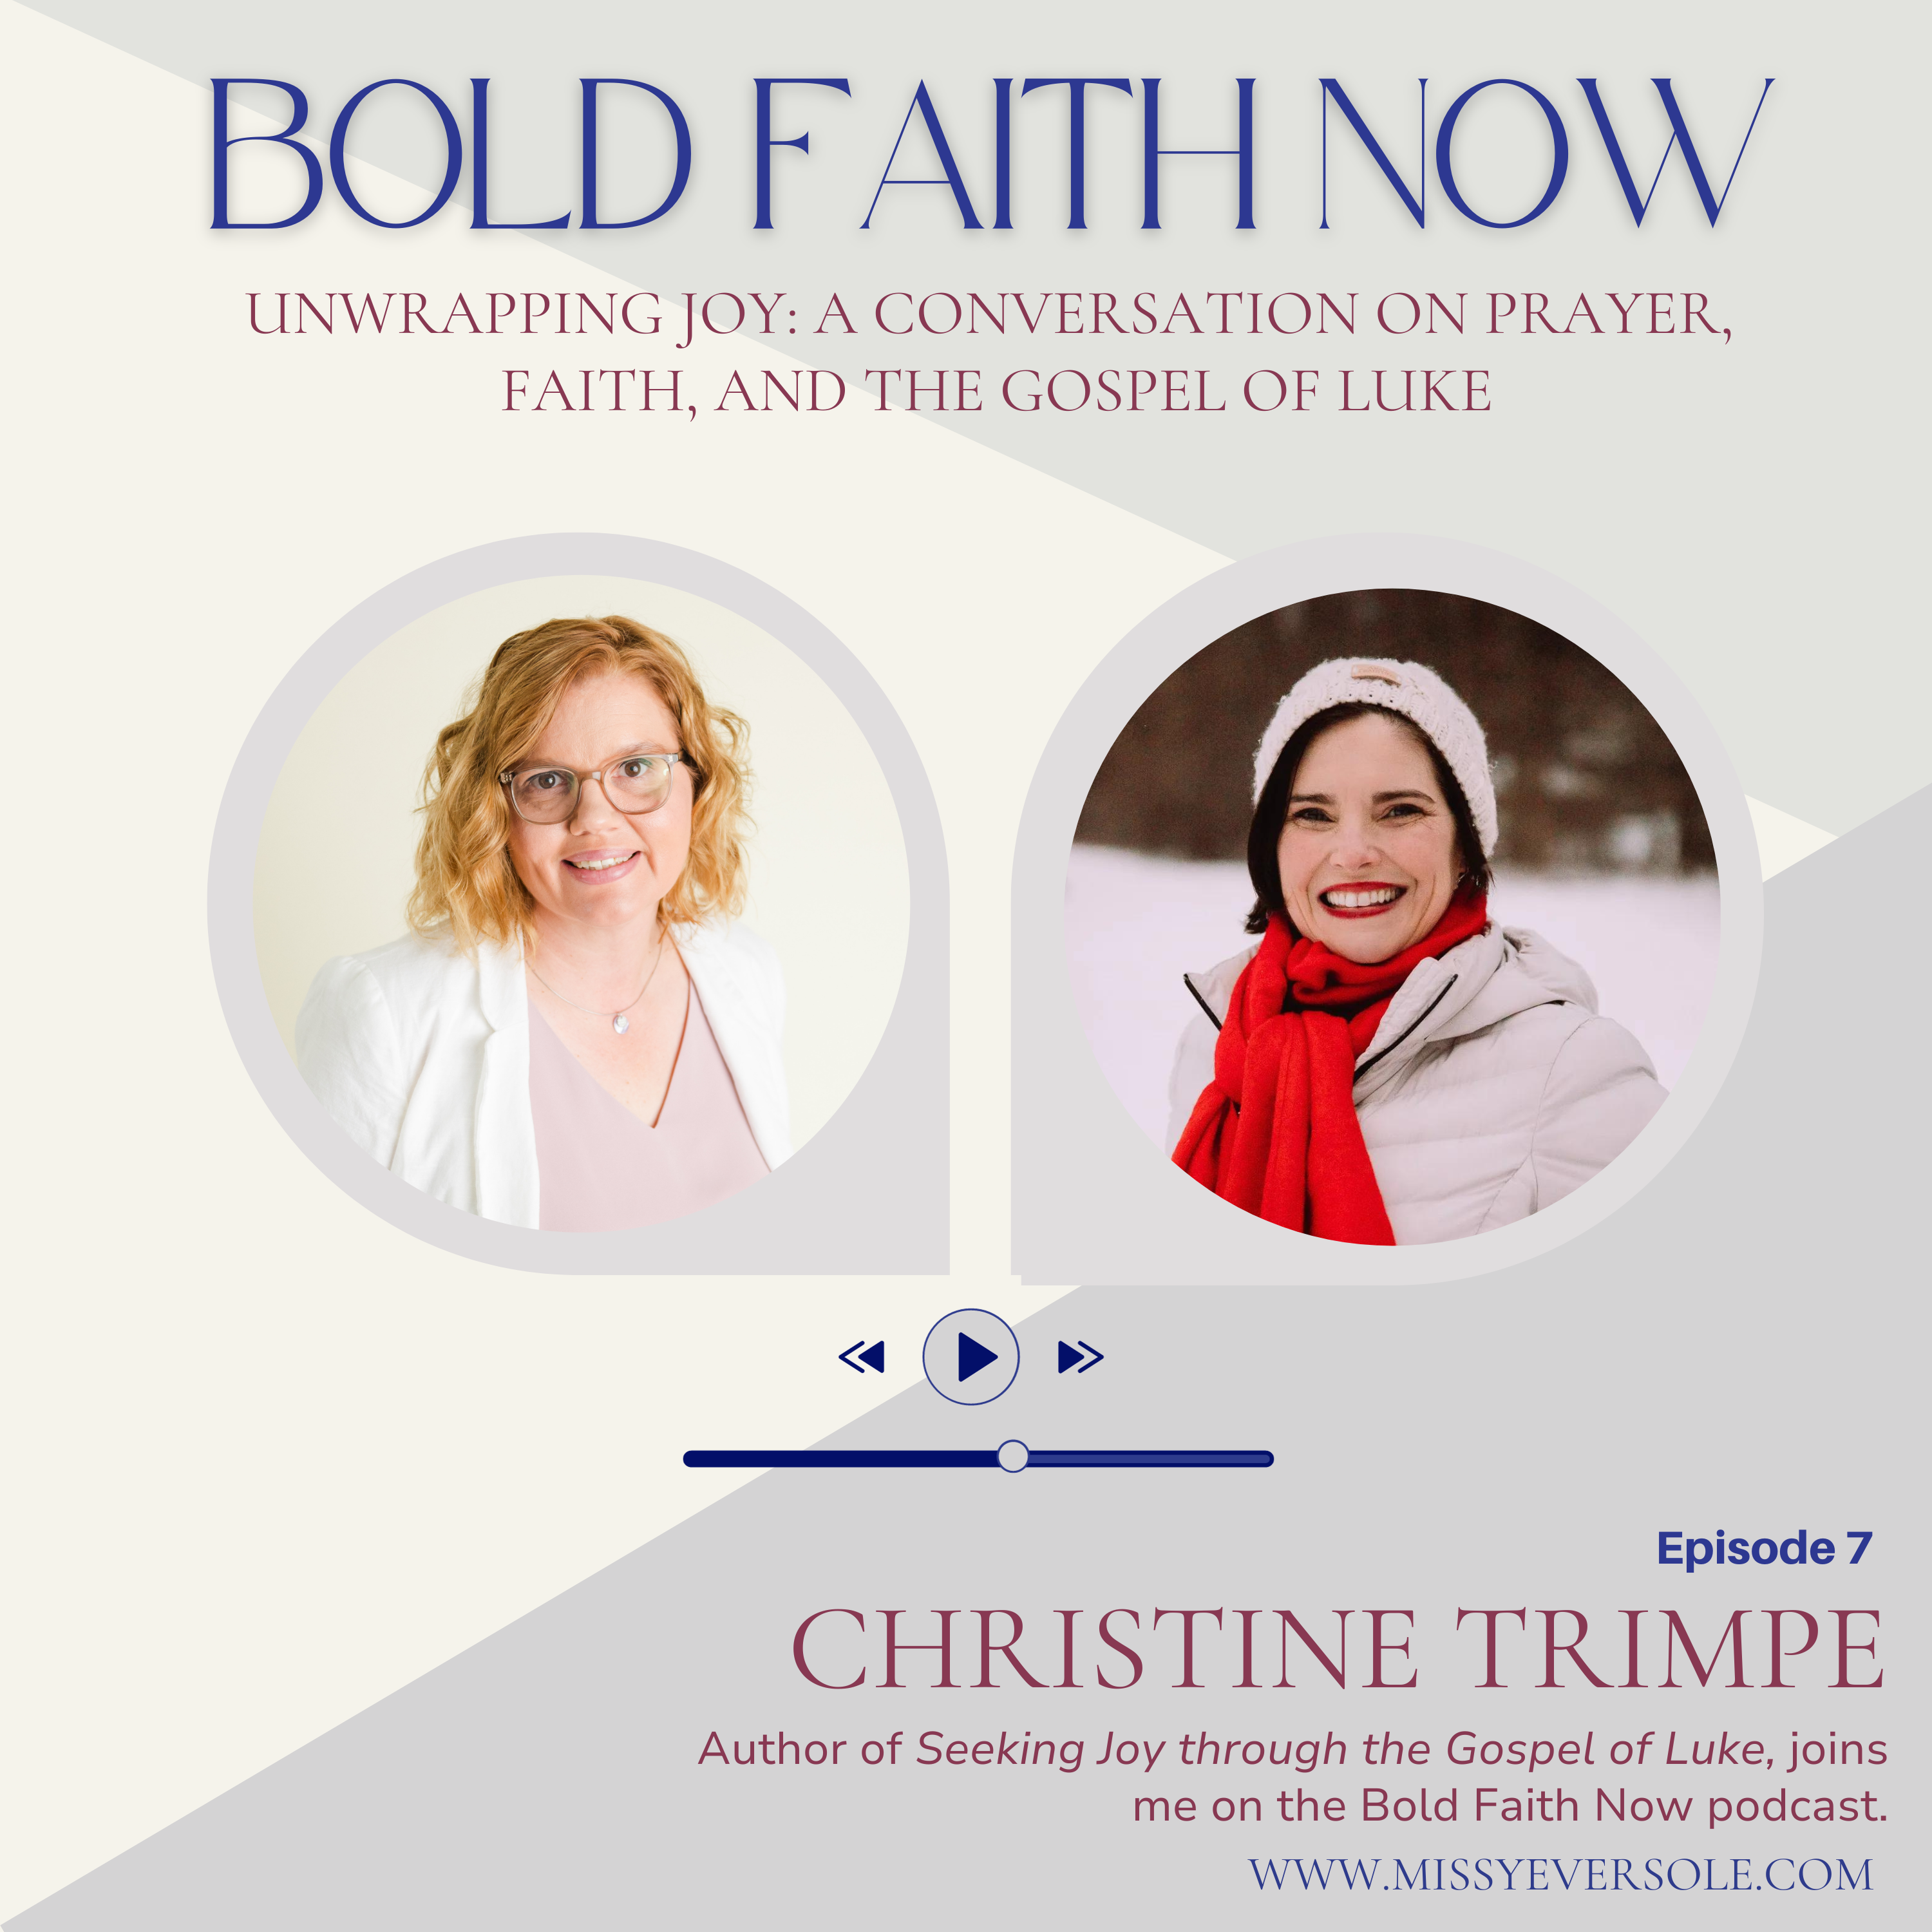 07 Unwrapping Joy: A Conversation on Prayer, Faith, and the Gospel of Luke with Christine Trimpe